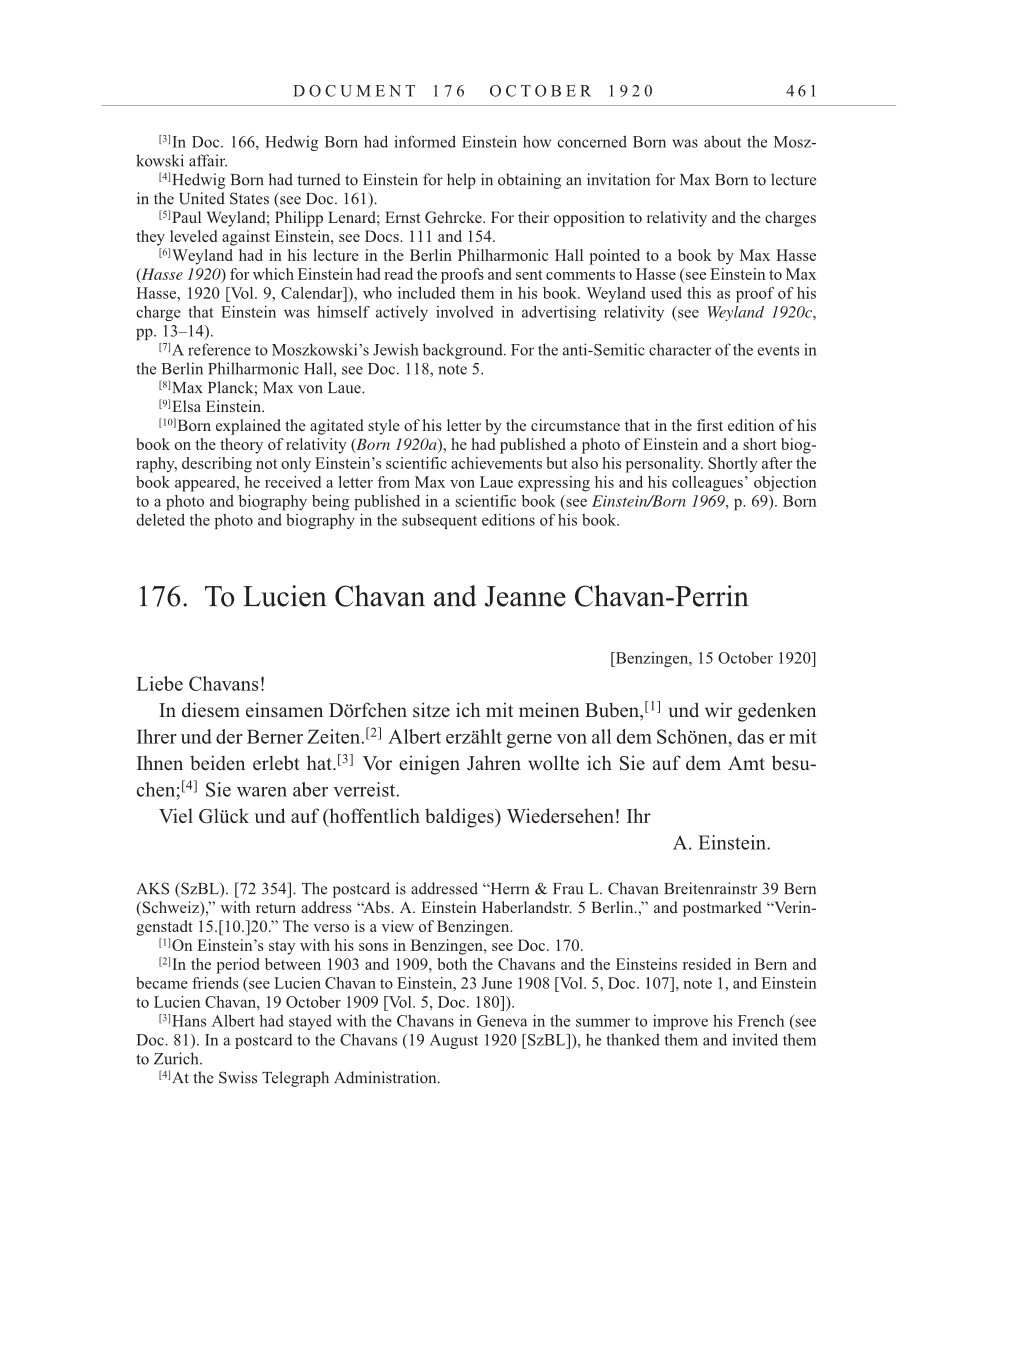 Volume 10: The Berlin Years: Correspondence May-December 1920 / Supplementary Correspondence 1909-1920 page 461